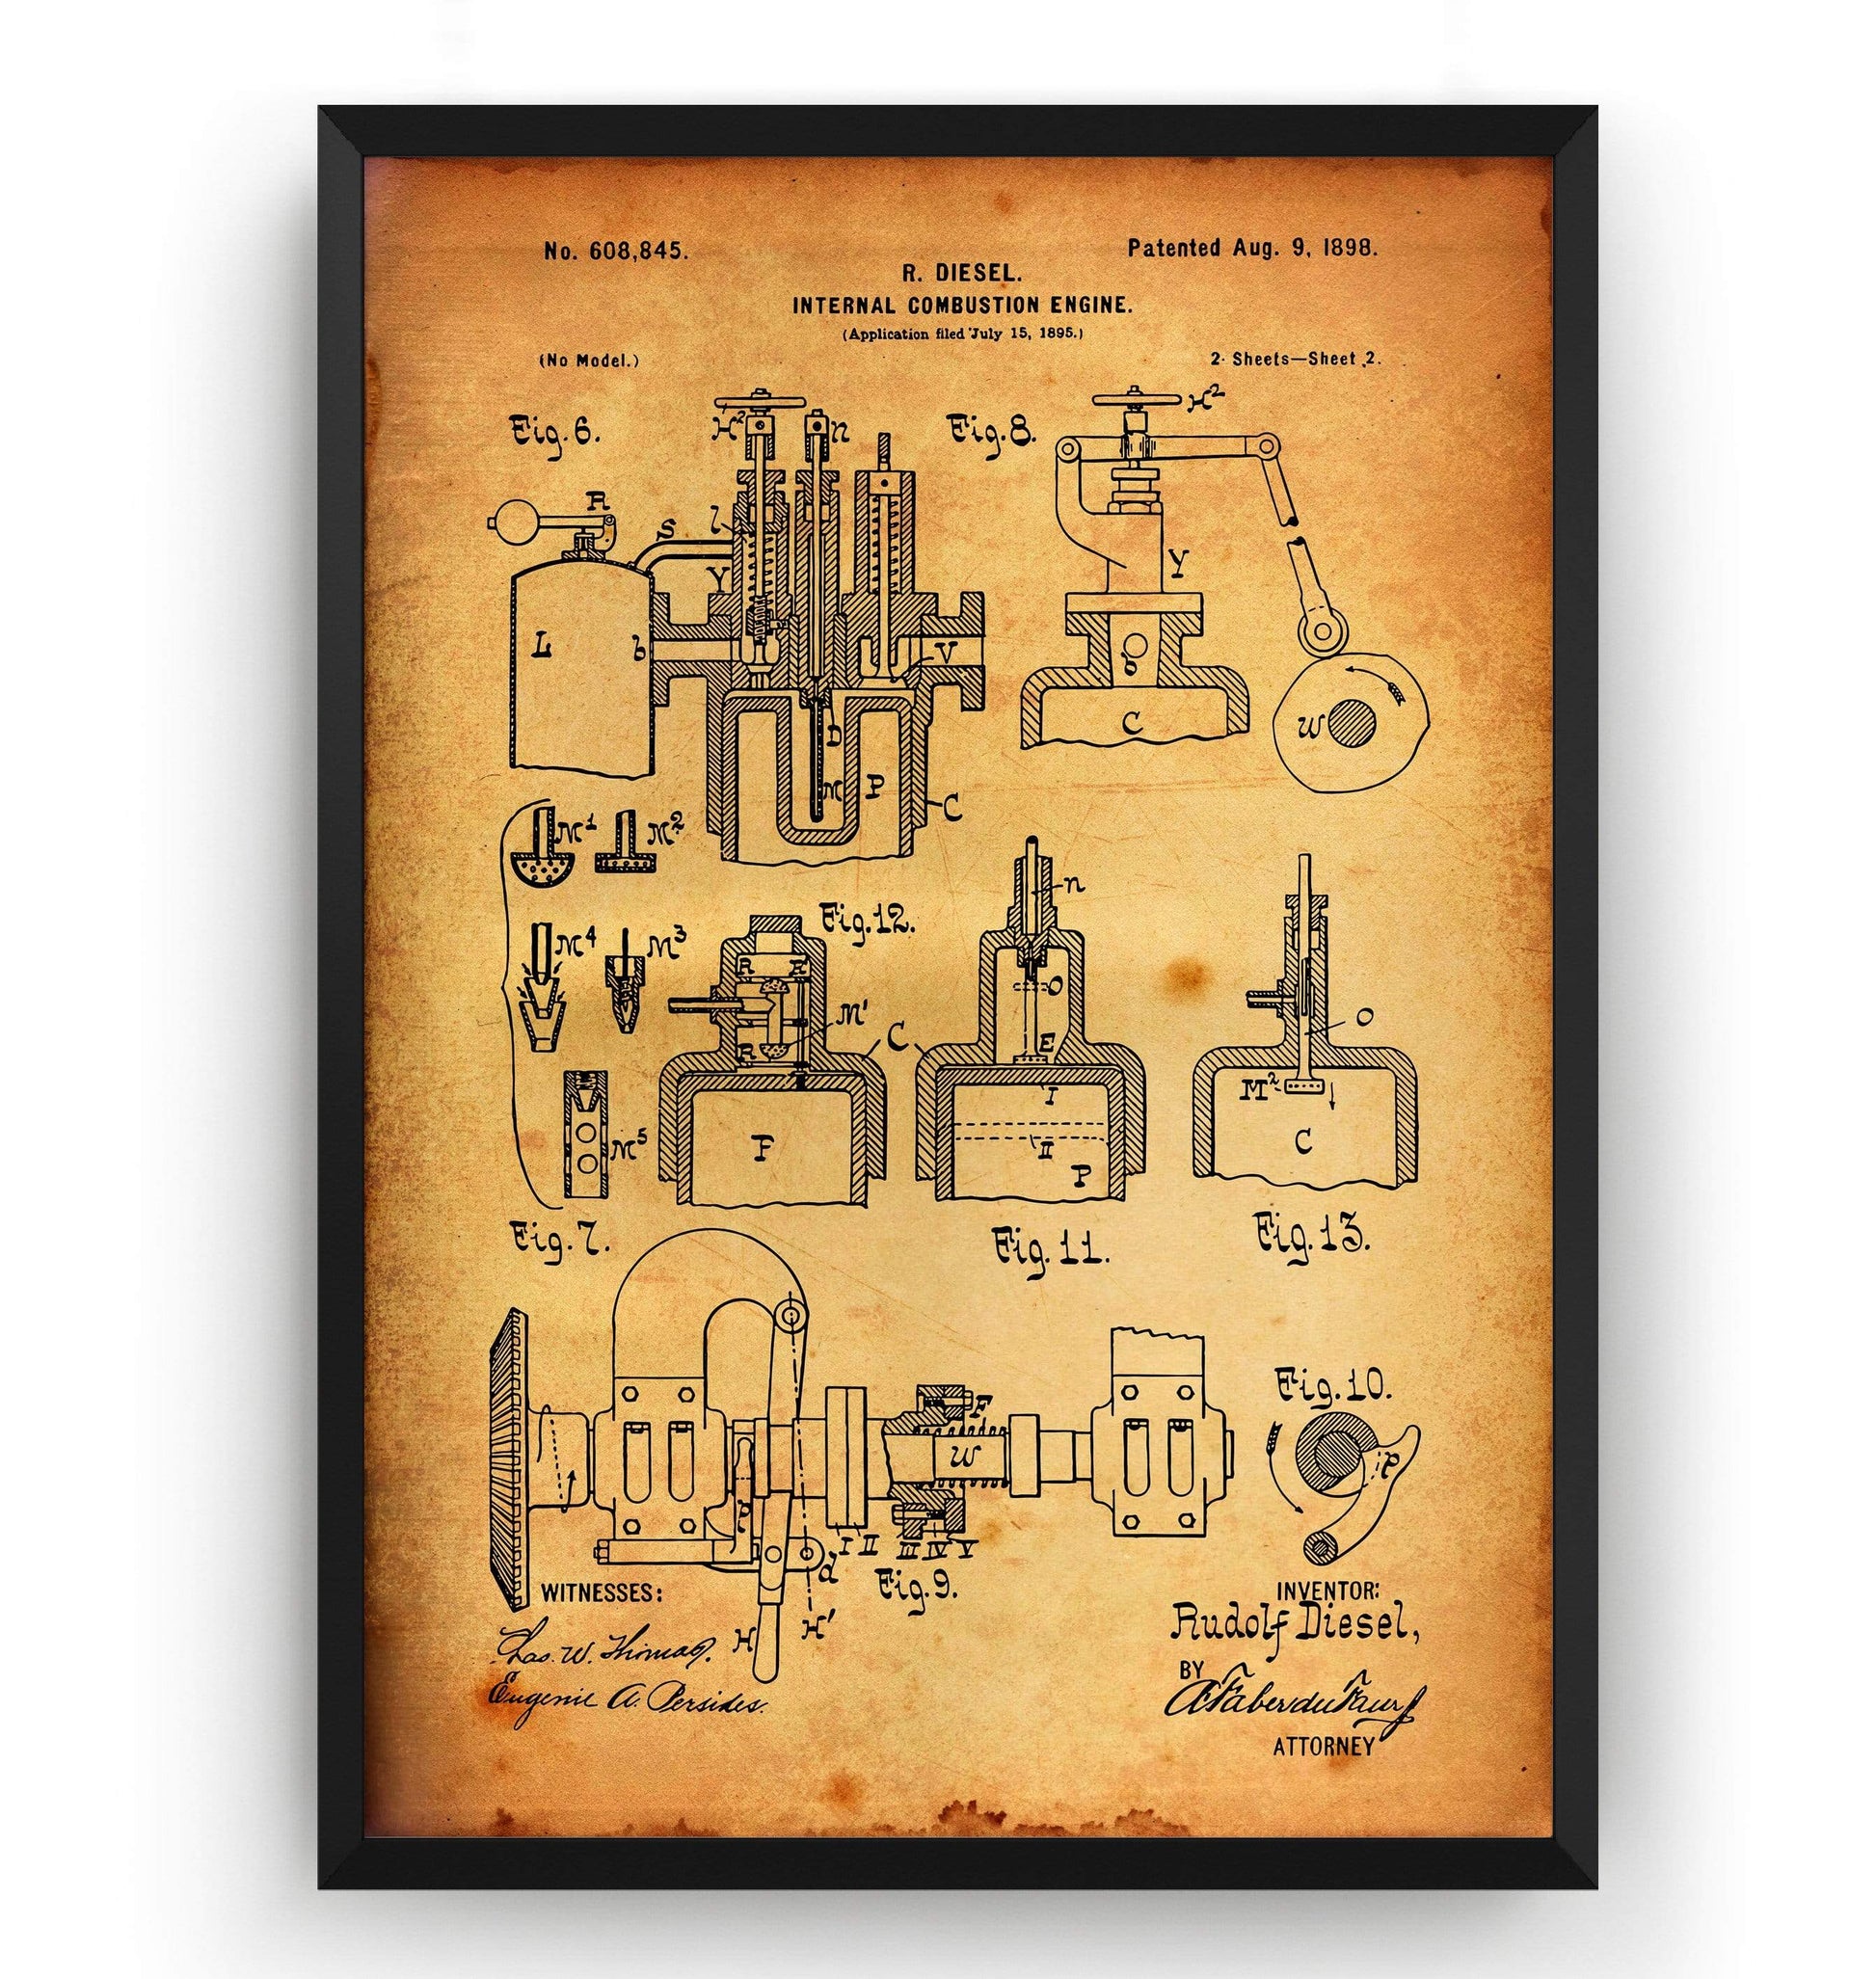 Diesel Combustion Engine Page 2 Patent Print - Magic Posters